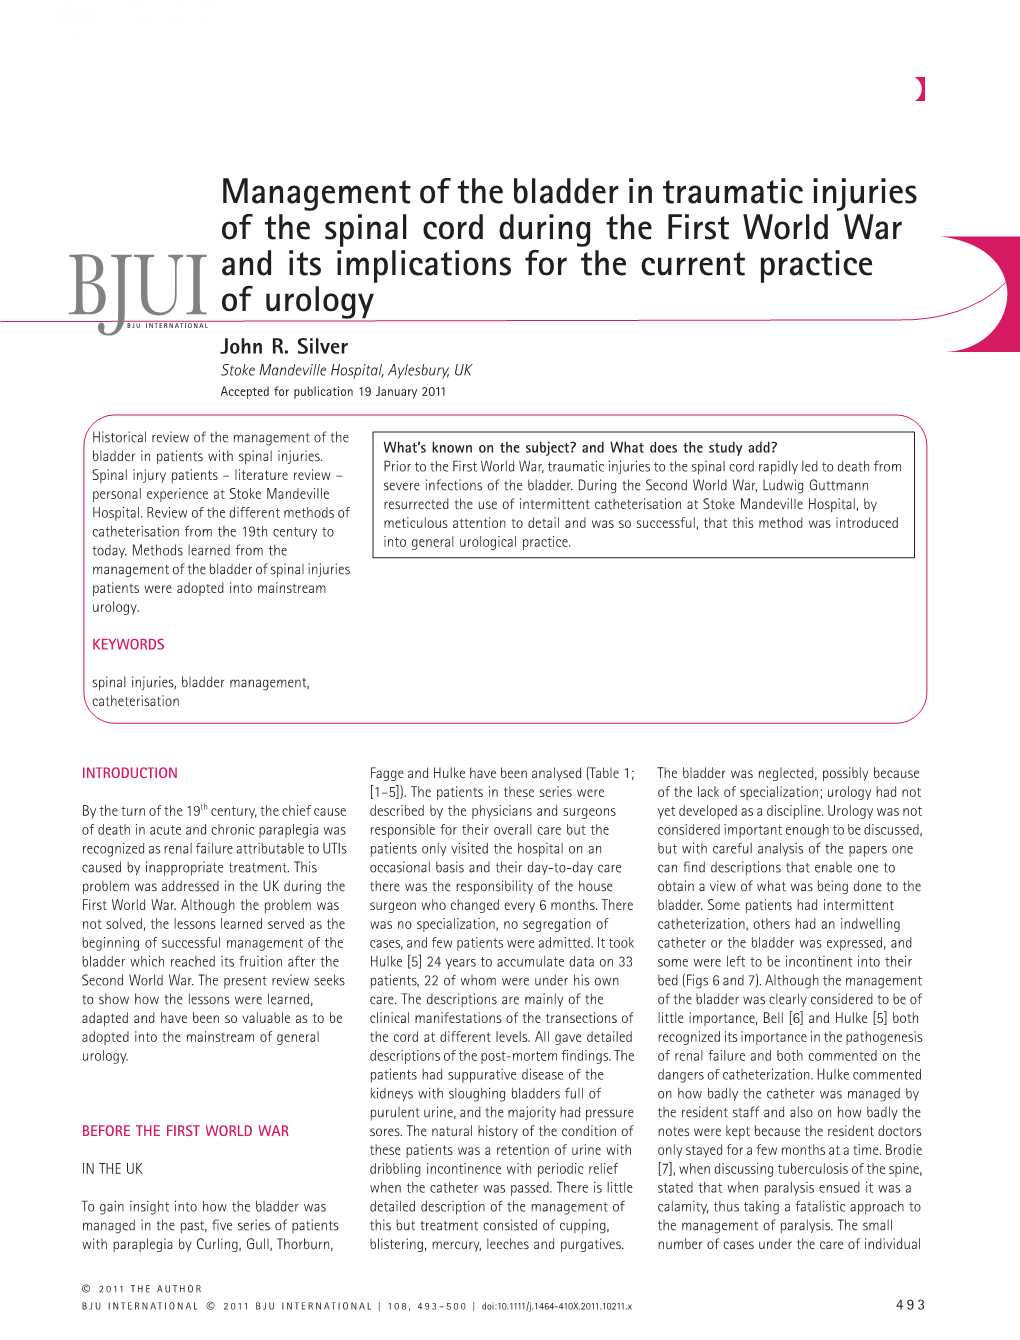 Management of the Bladder in Traumatic Injuries of the Spinal Cord During the First World War and Its Implications for the Curre